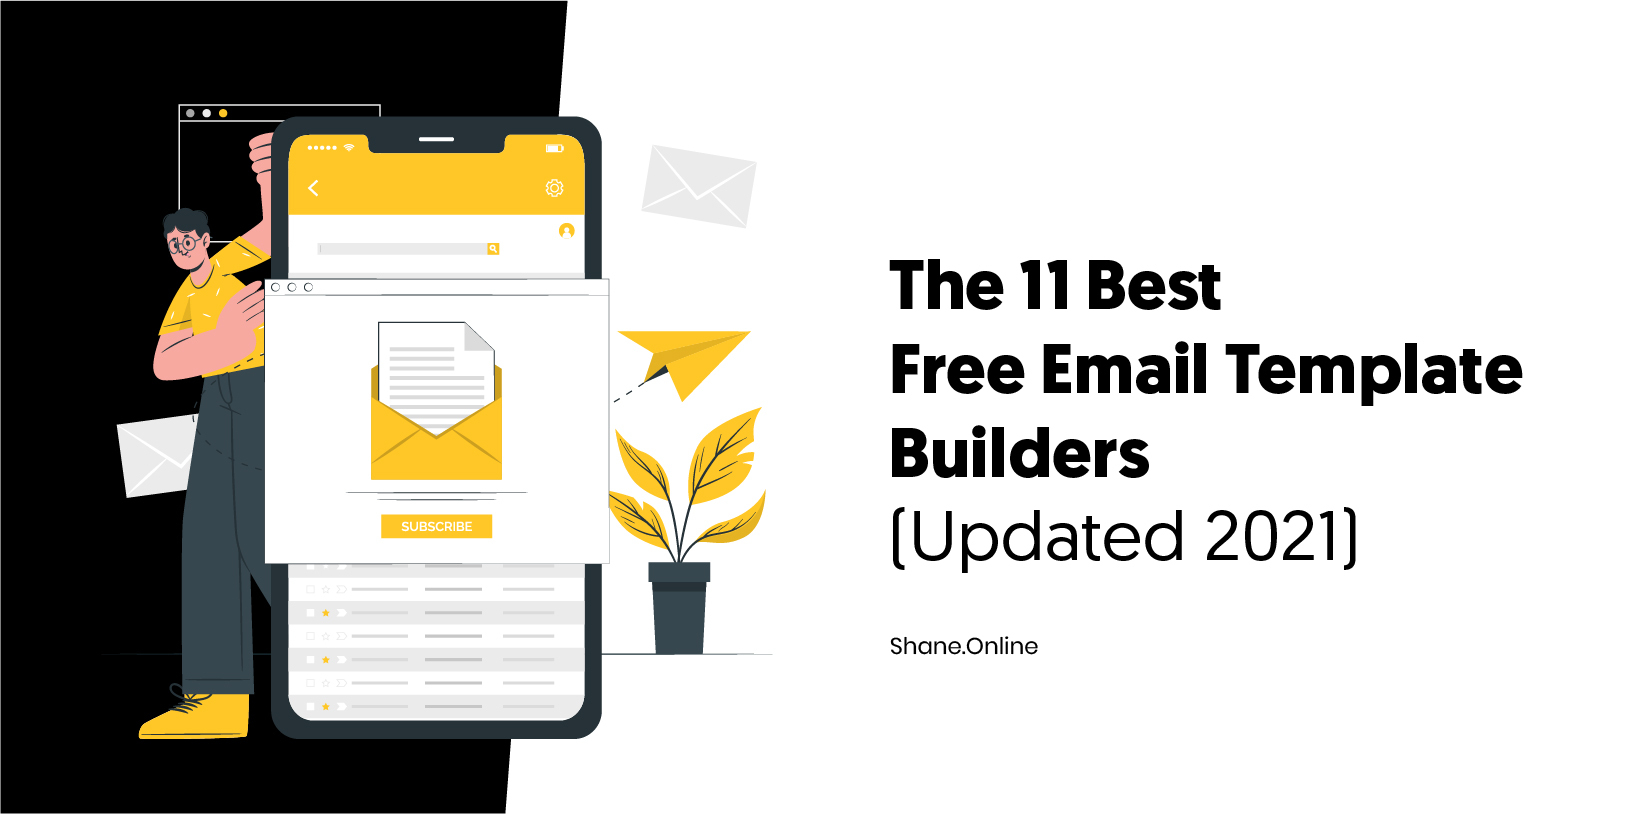 Best Free Email Template Builders to Improve Your Email Marketing